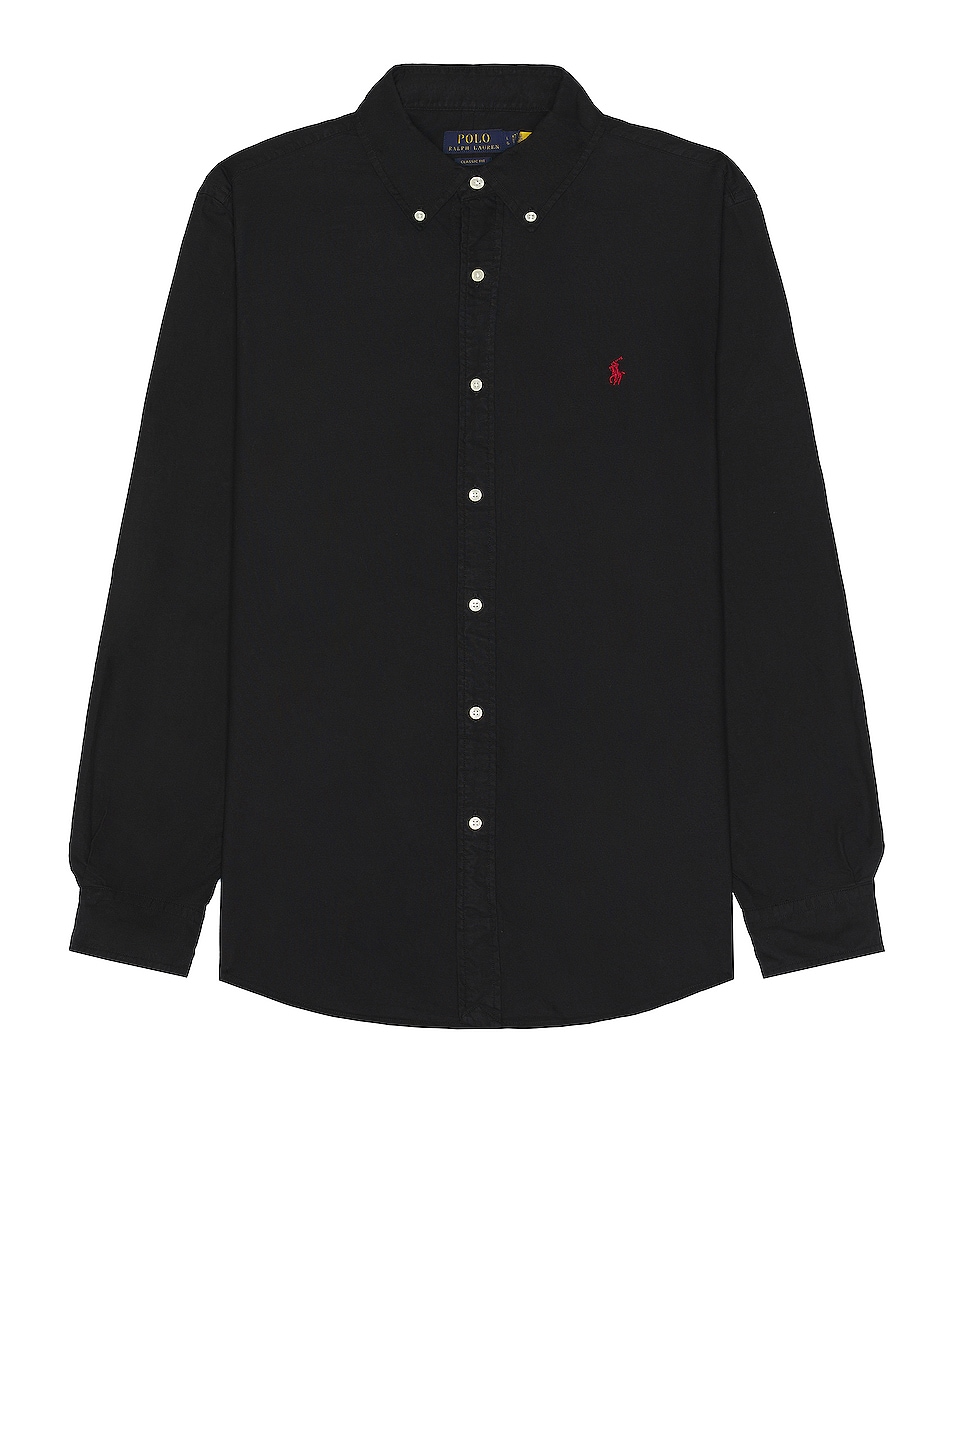 Image 1 of Polo Ralph Lauren Garment Dyed Oxford Shirt in Black